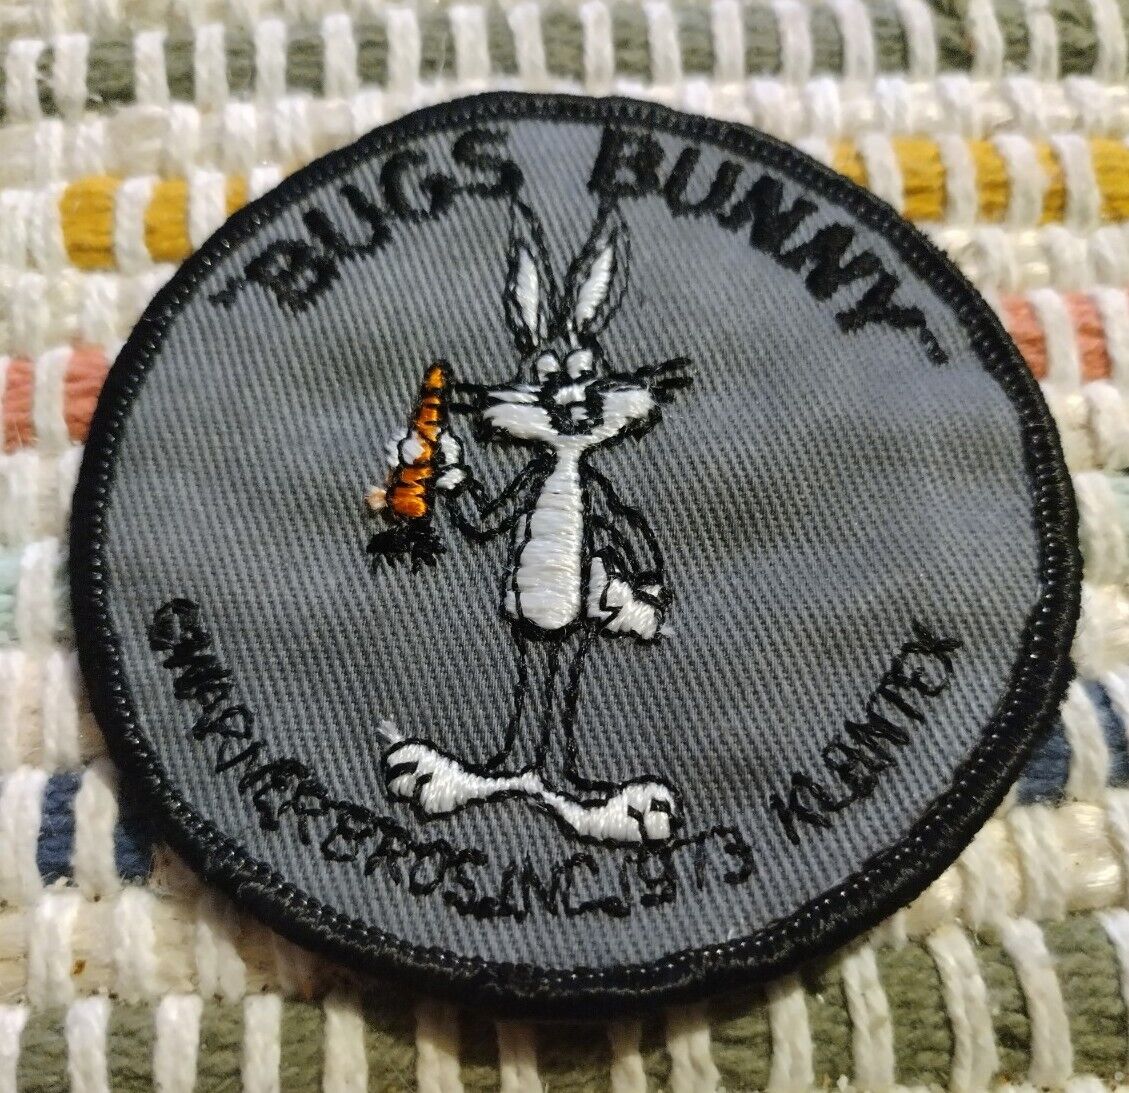 Vintage 1973 BUGS BUNNY WARNER BROS. Character Patch Embroidered NOS NEW Cartoon